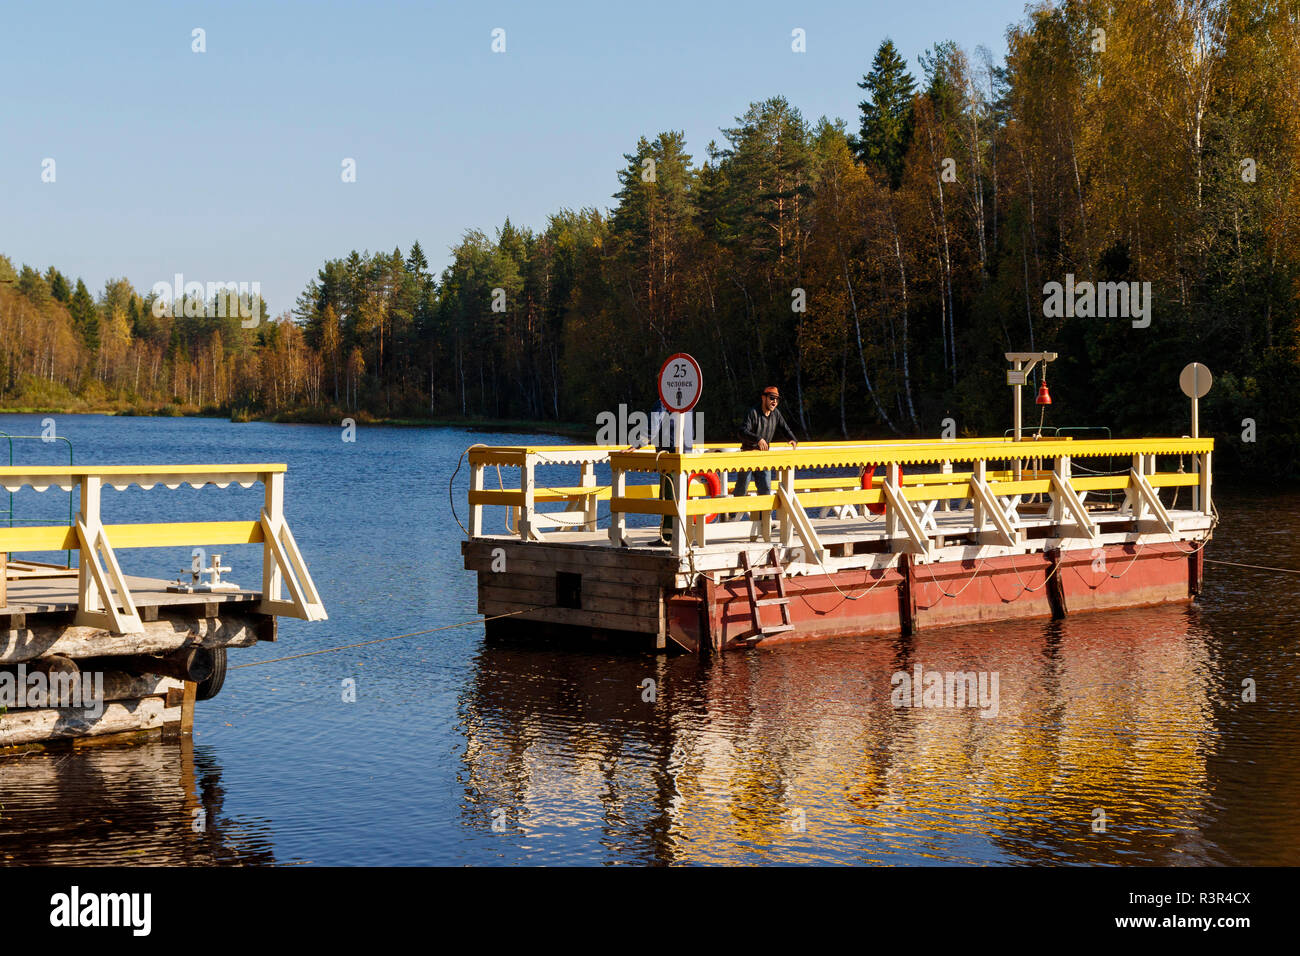 The pull-ferry operating on the Svir River at Verkhniye Mandrogi, Russia. A craft and museum attraction. Stock Photo